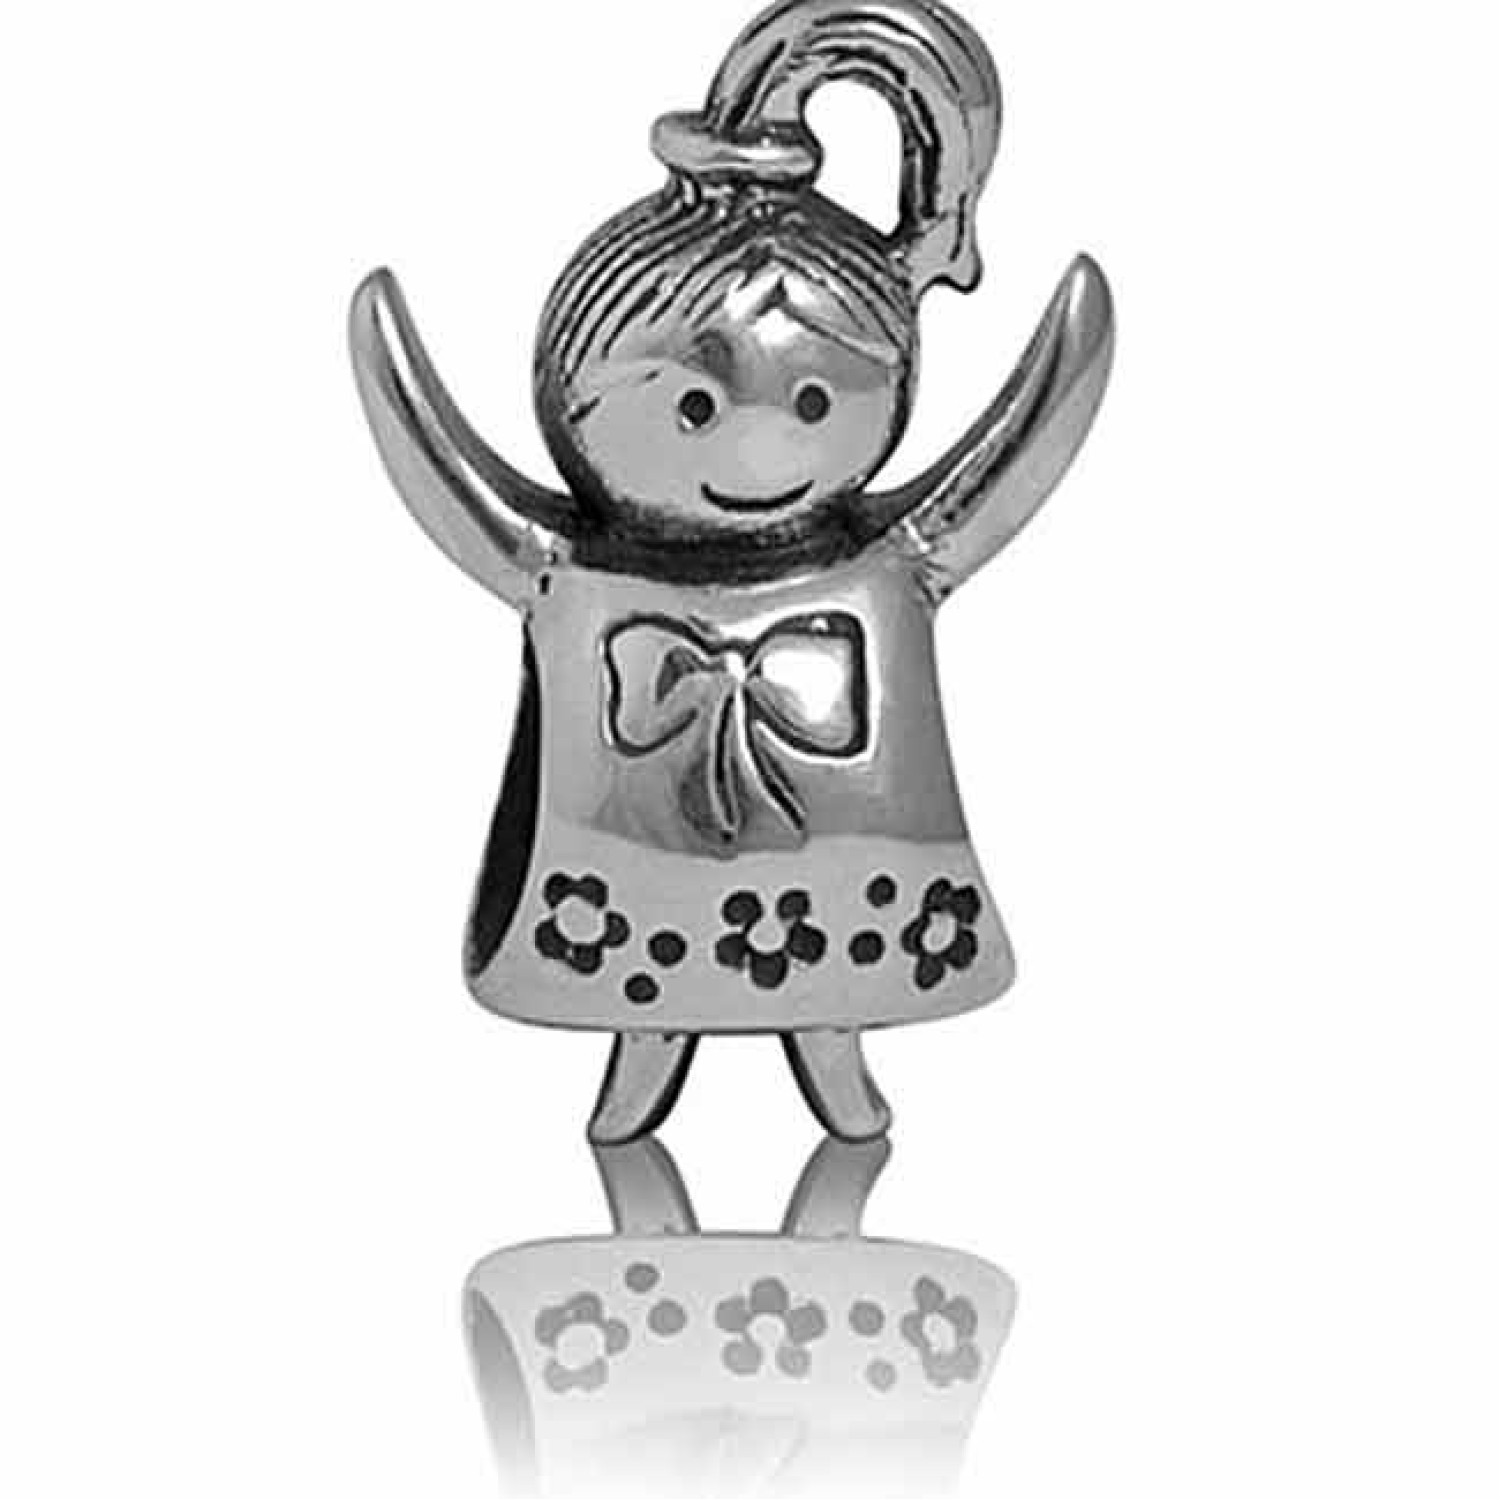 LK140 Evolve Treasured Girl. LK140 Evolve Treasured Girl Silver Charm Our Treasured Girl charm represents those special young ladies we are lucky enough to have as part of our family.   This charm celebrates the delight our girls bring us, with @christies